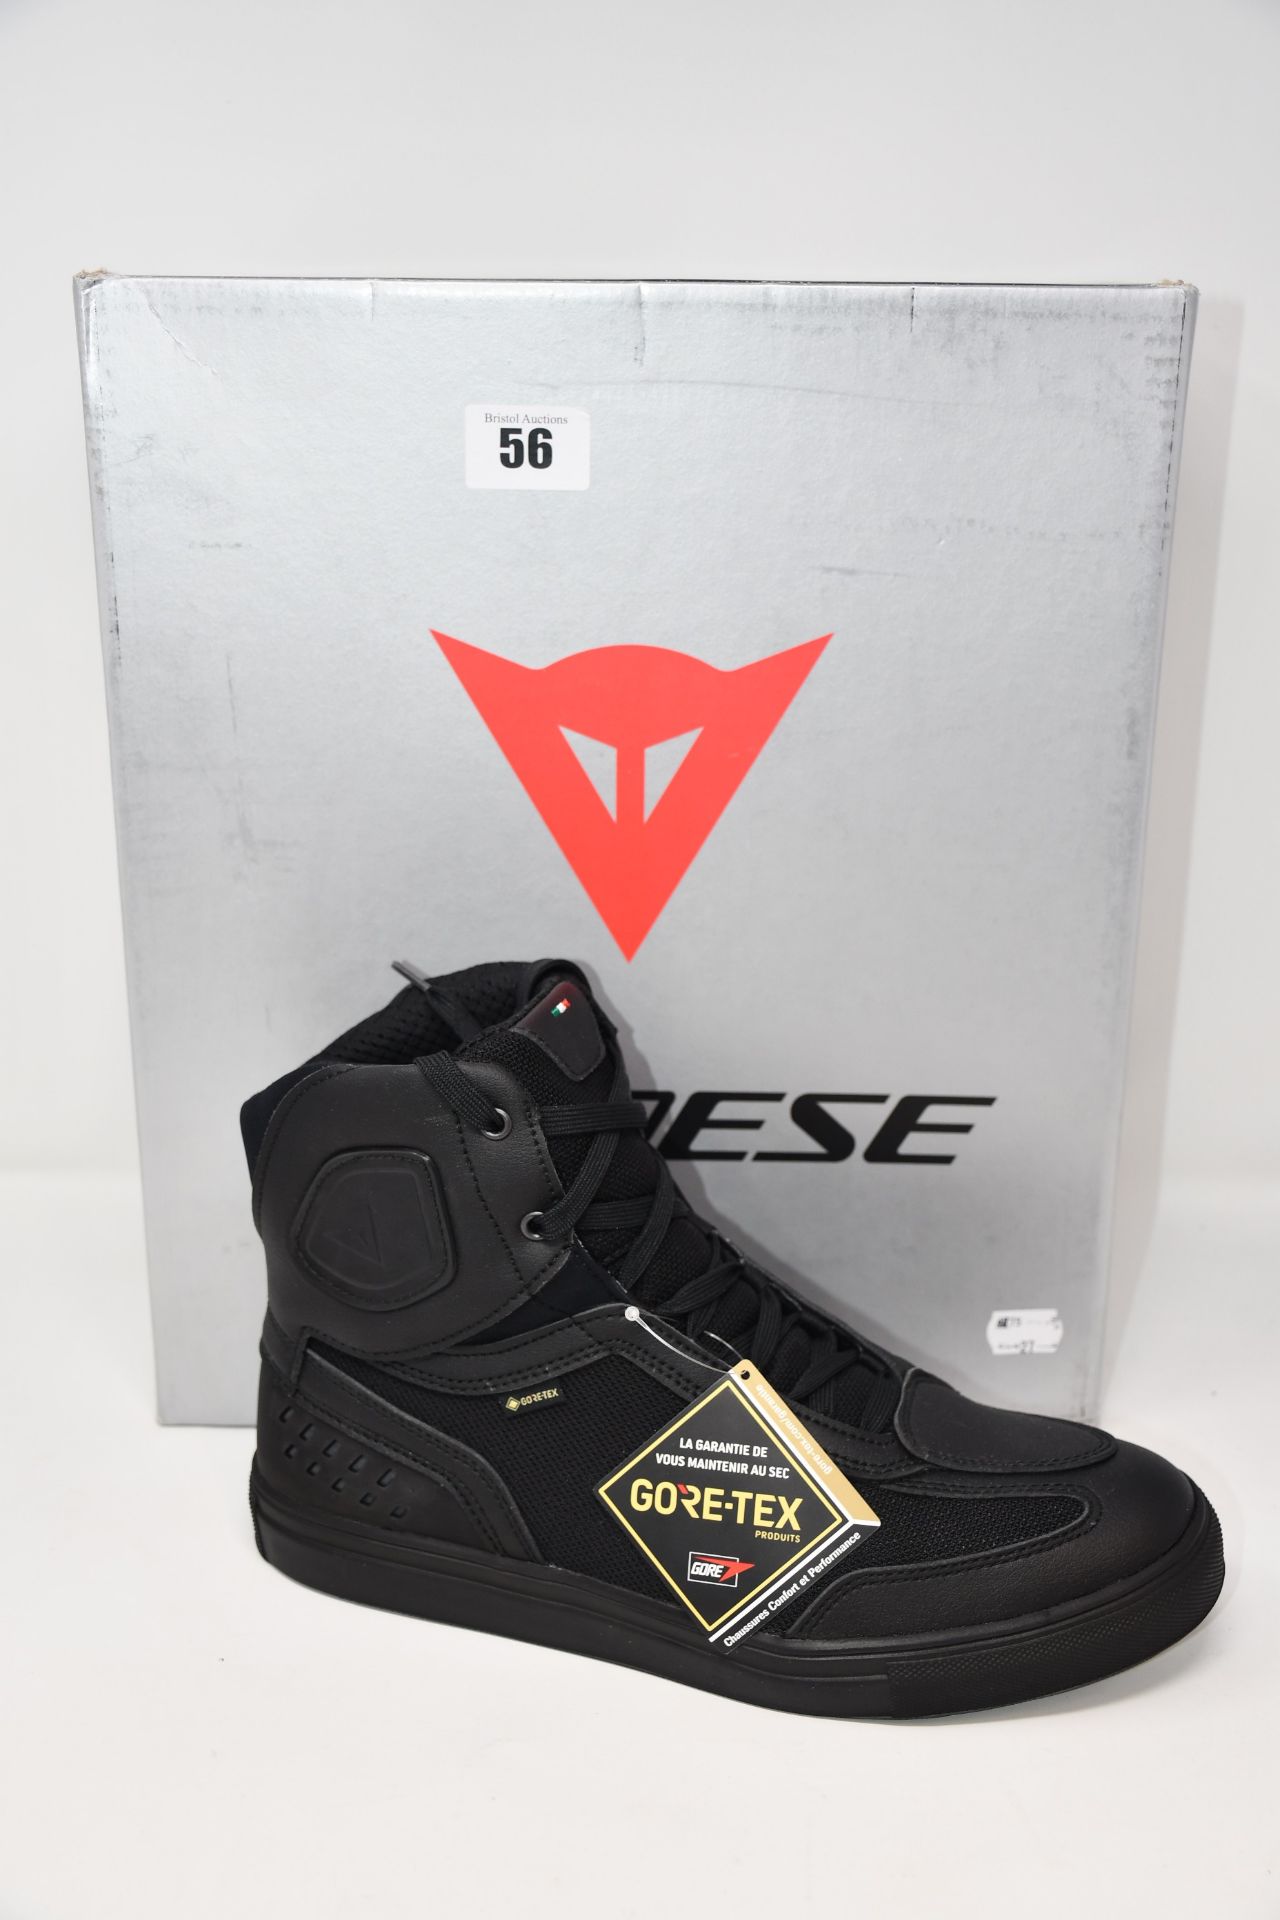 A pair of as new Dainese Street Darker Gore-Tex shoes in black (UK 10).